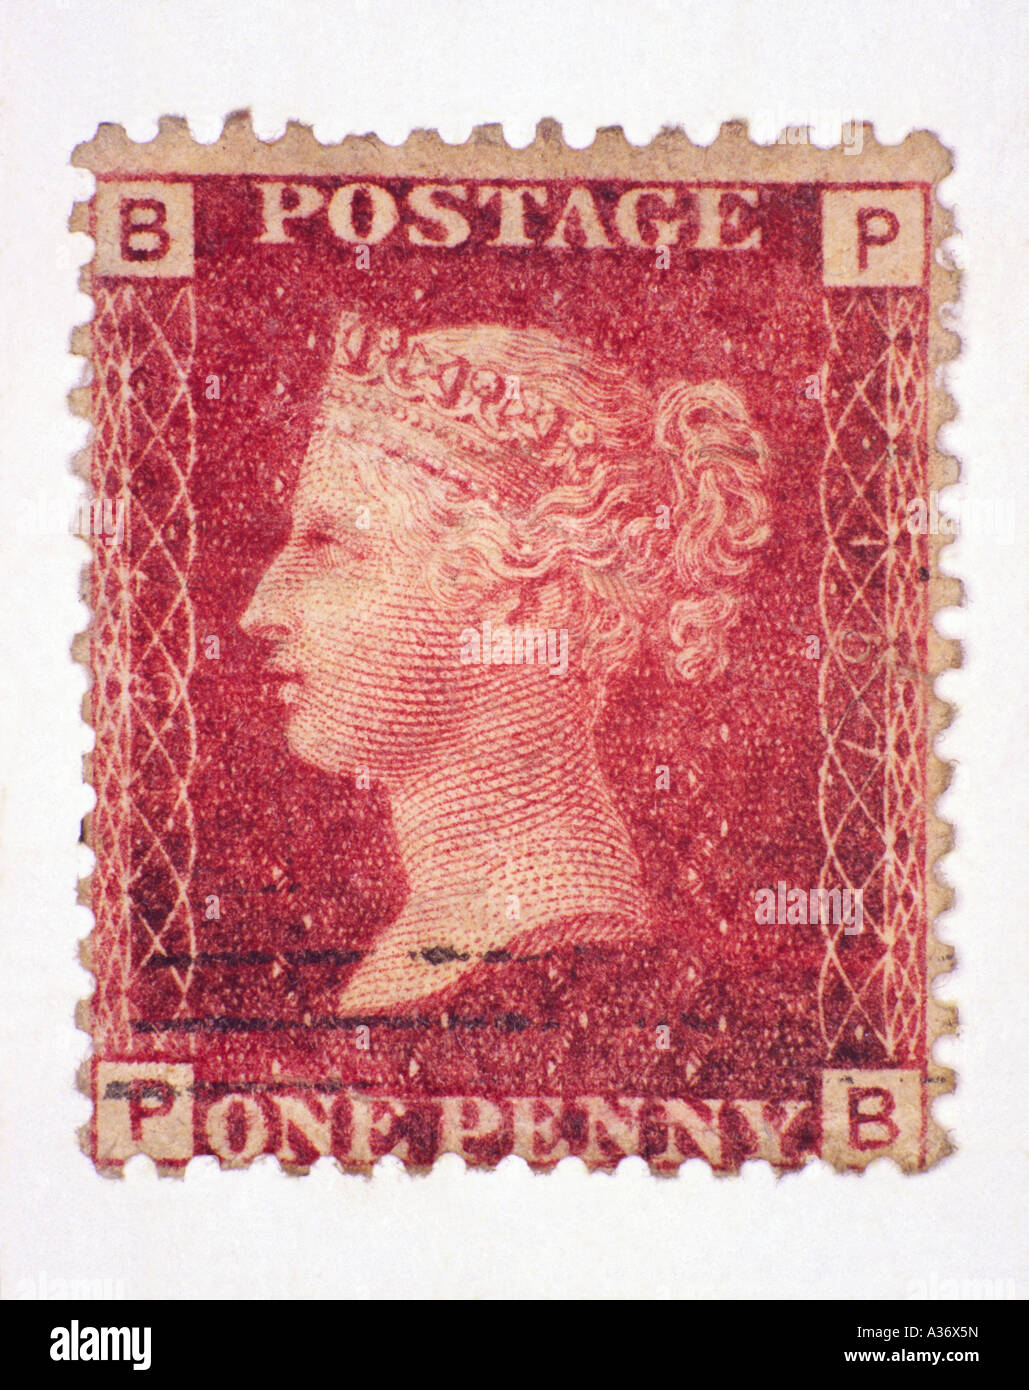 Victorian Penny Red stamp Banque D'Images